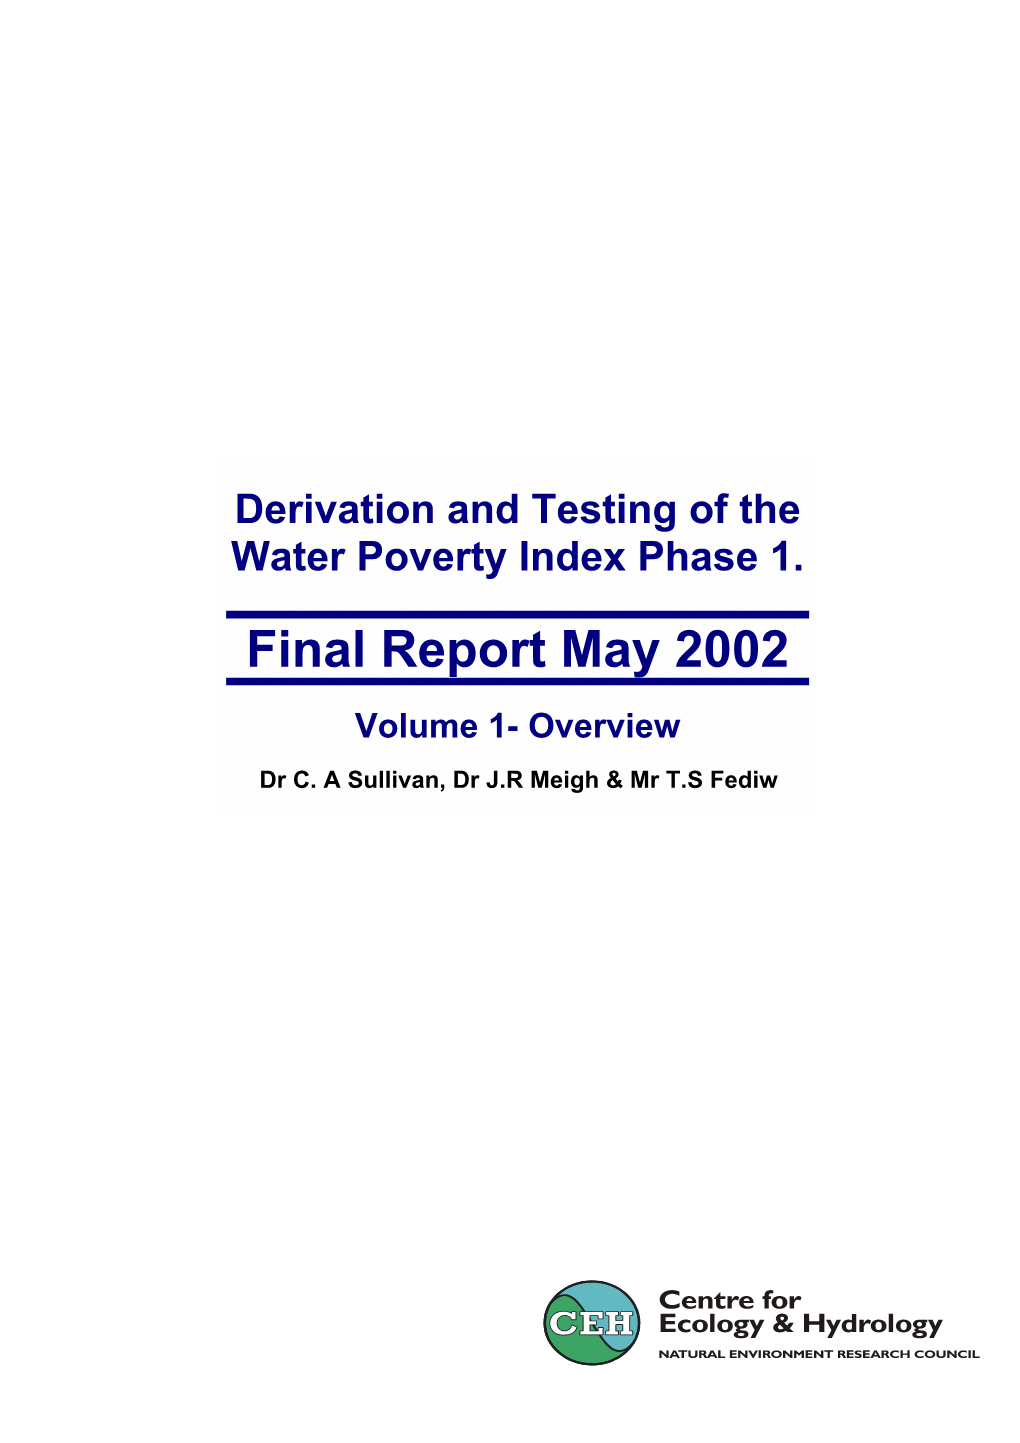 Derivation and Testing of the Water Poverty Index Phase 1